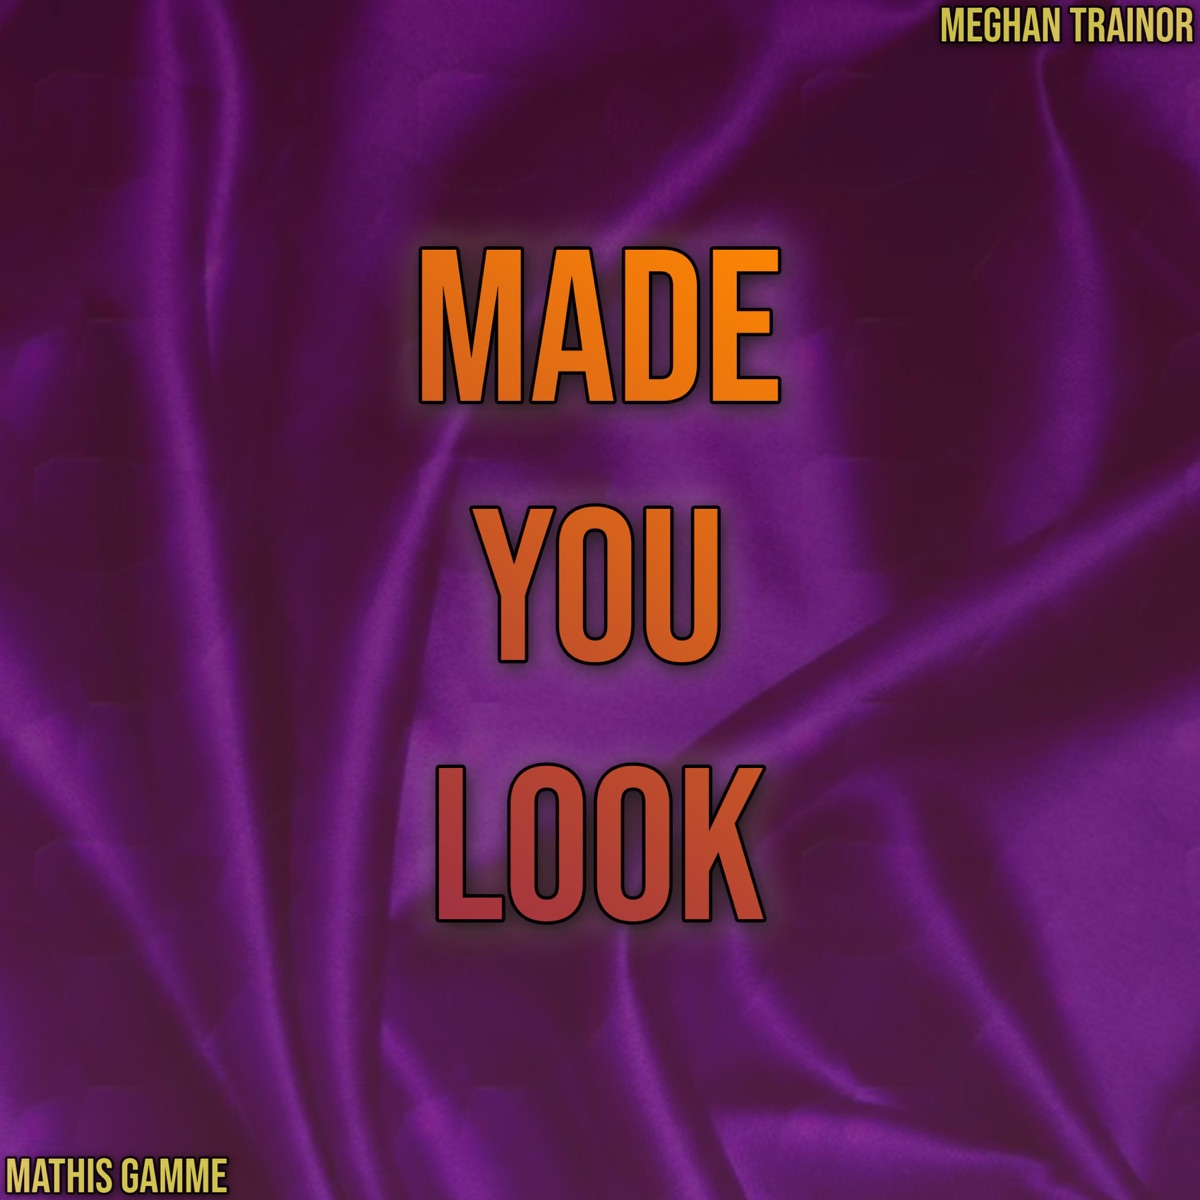 Made You Look - Single - Album by Mathis Gamme - Apple Music